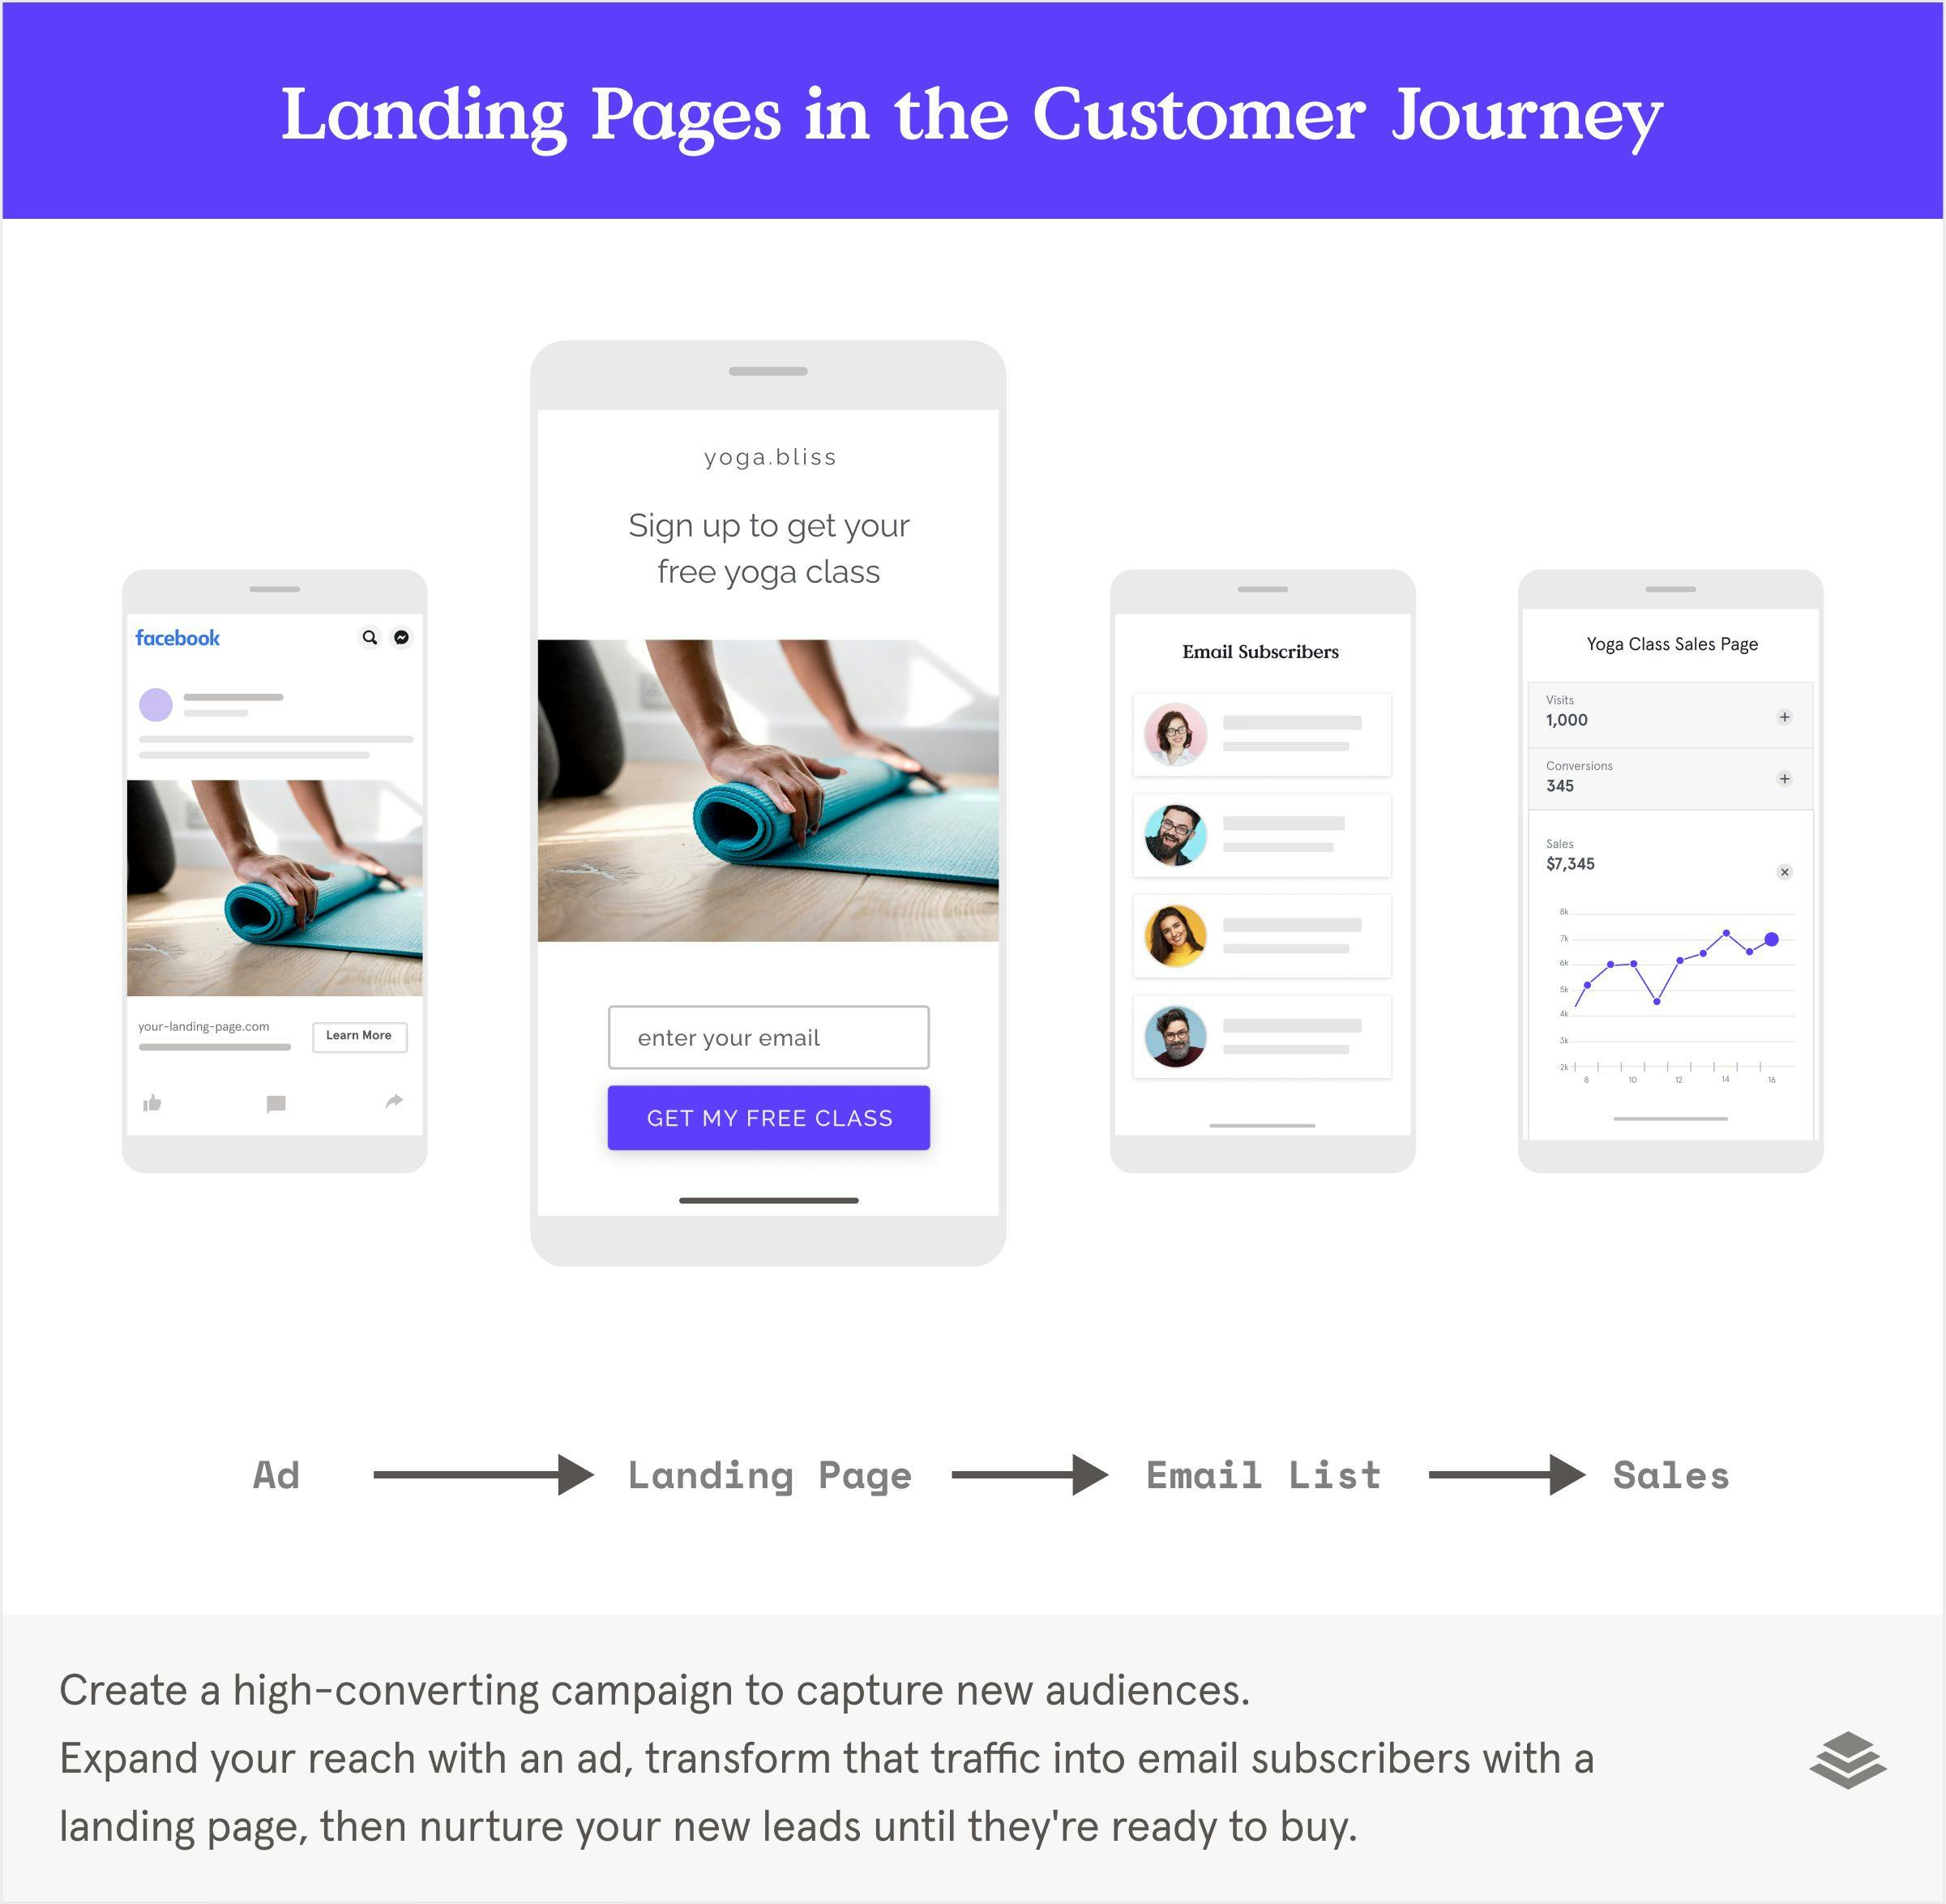 Landing pages in the customer journey